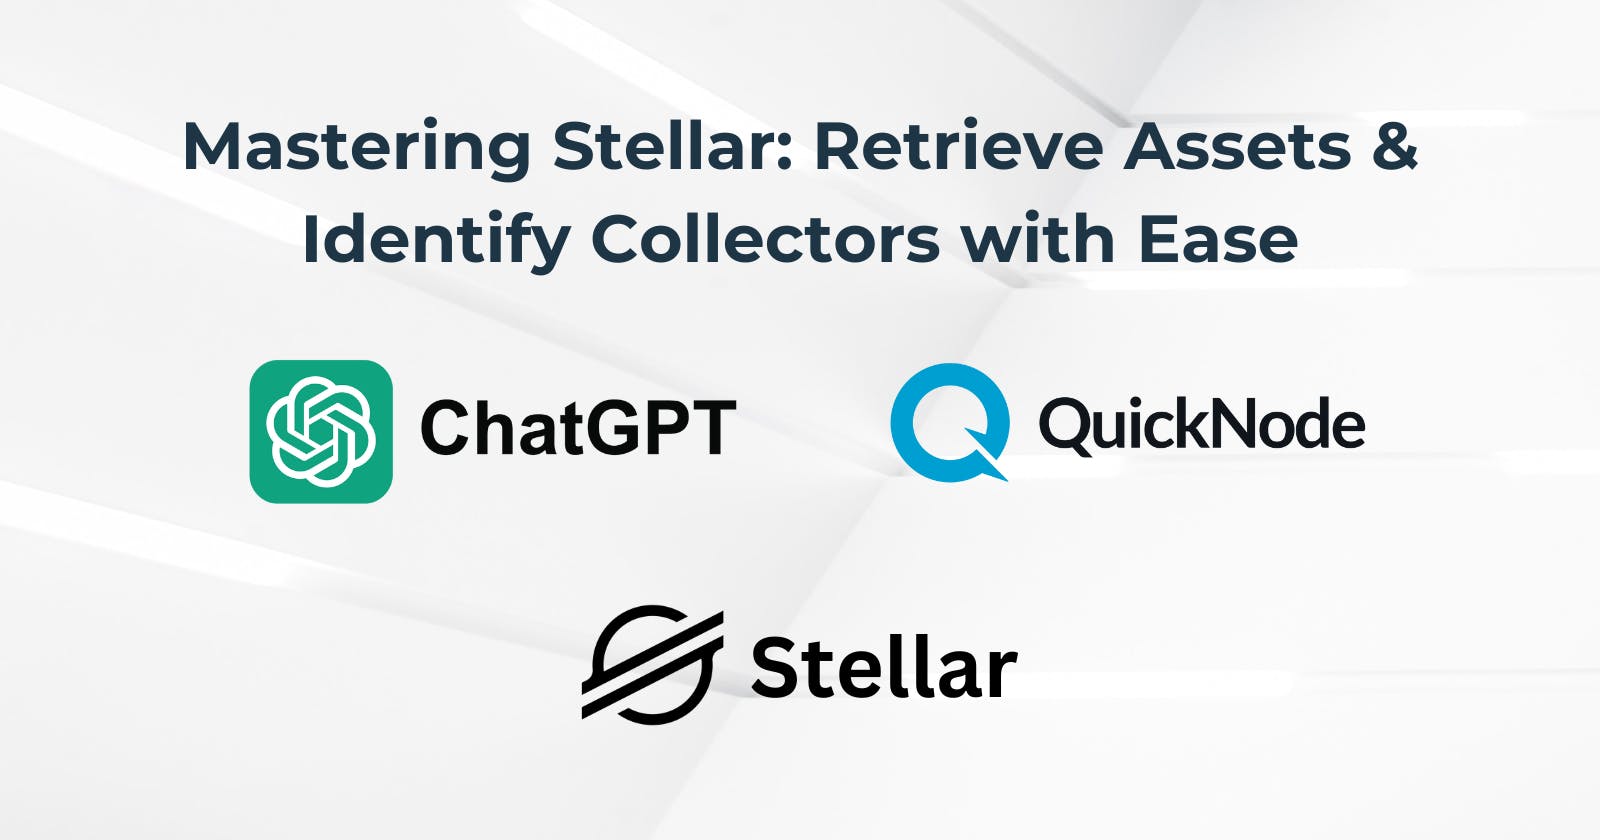 Mastering Stellar: Retrieve Assets & Identify Collectors with Ease